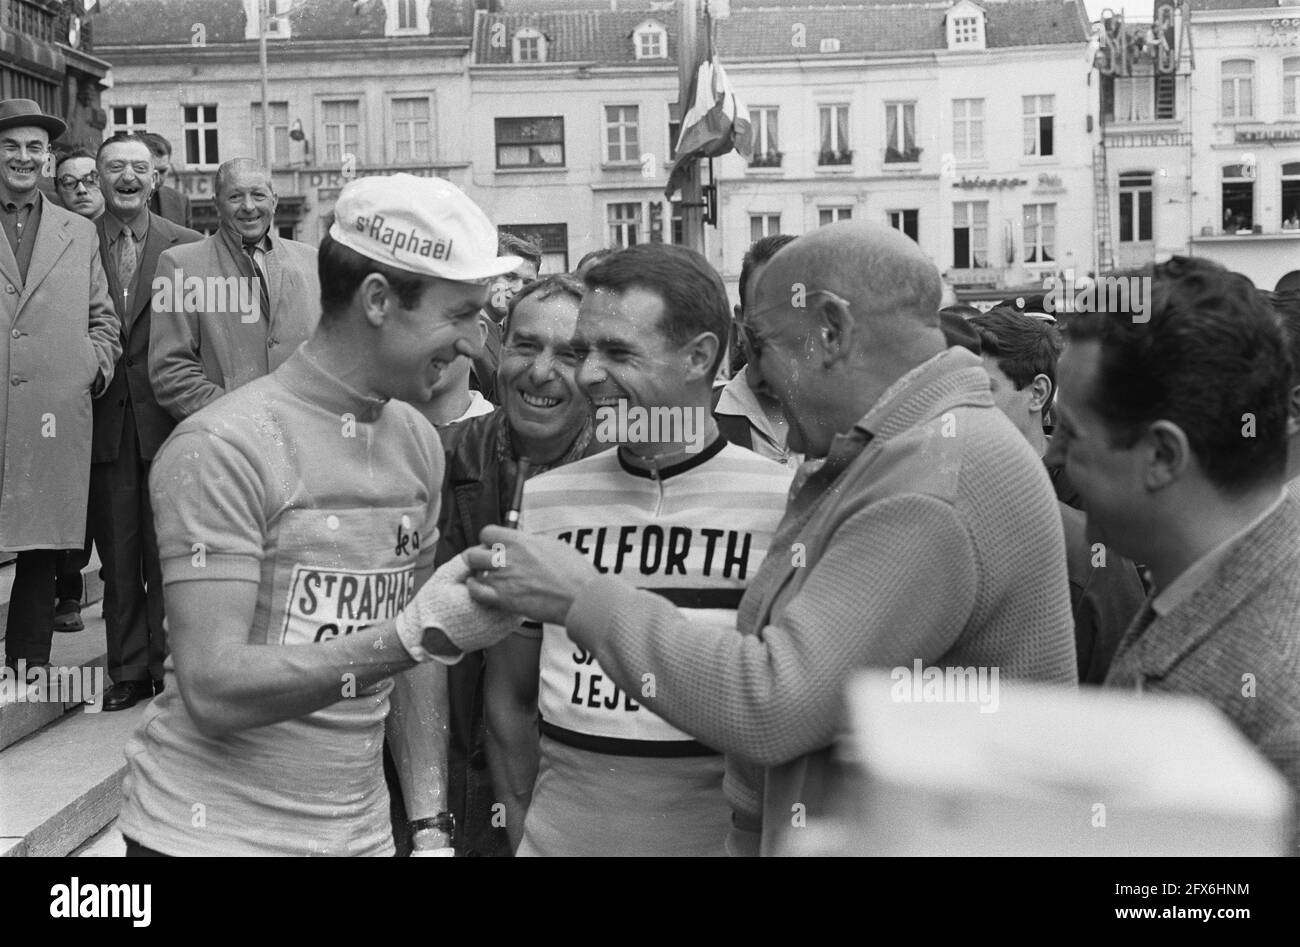 Ab Geldermans and Henry Anglade, Tour de France 1963, The Netherlands, 20th century press agency photo, news to remember, documentary, historic photography 1945-1990, visual stories, human history of the Twentieth Century, capturing moments in time Stock Photo